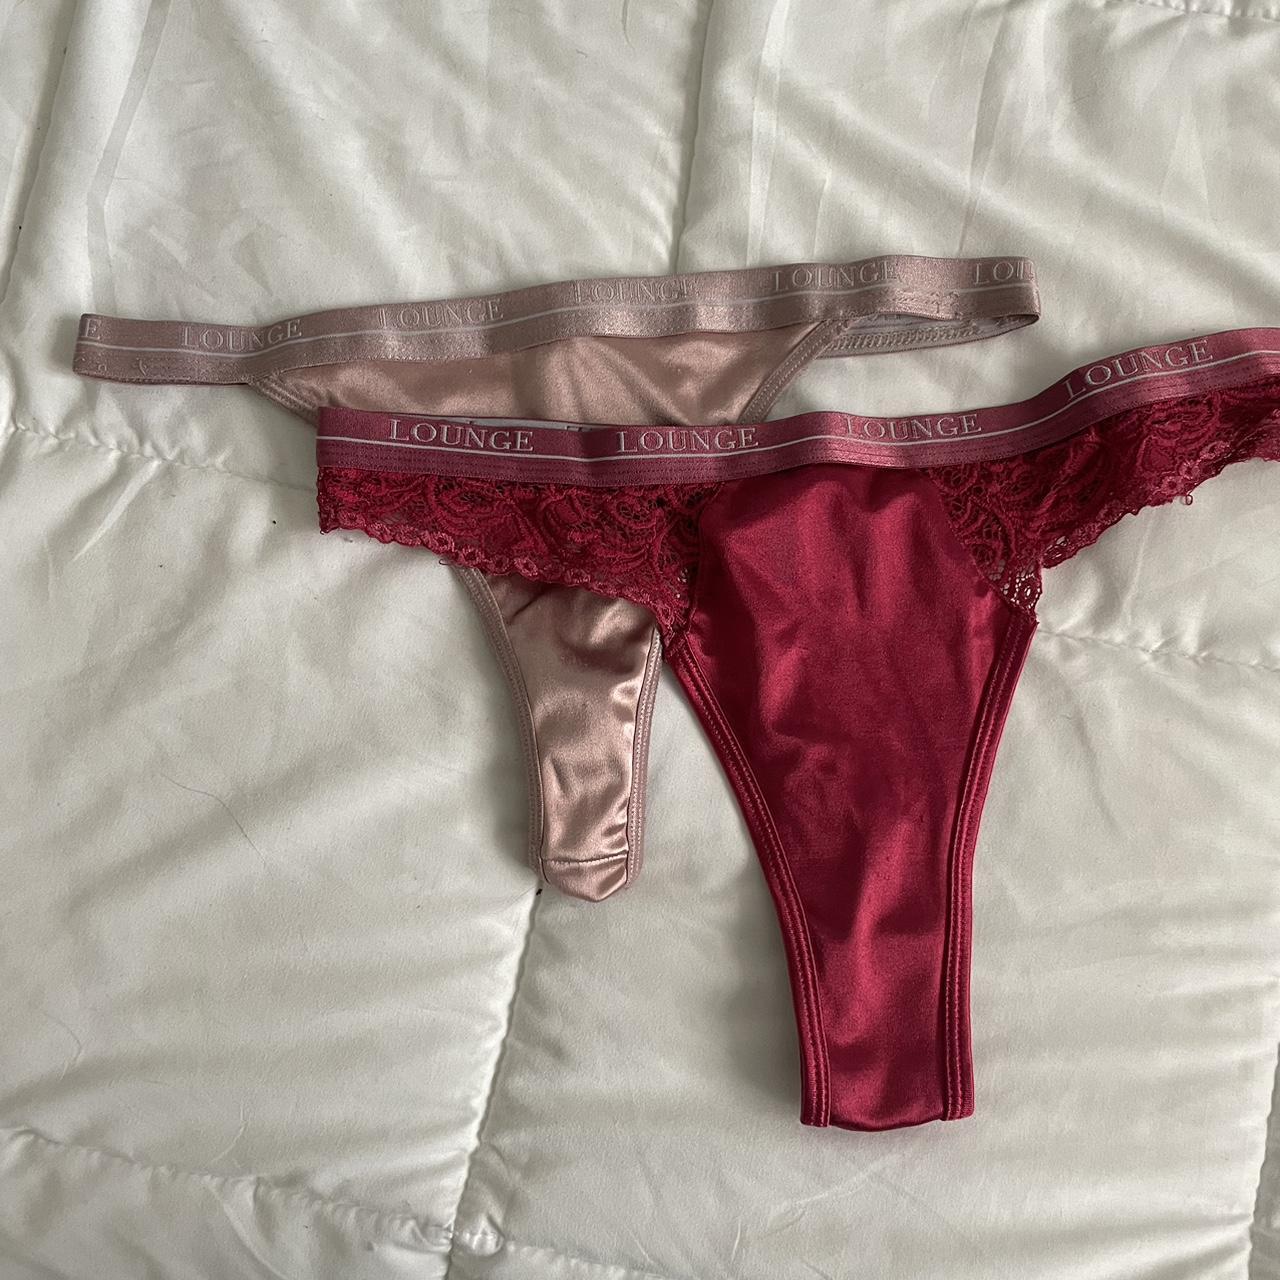 100+ affordable used panties For Sale